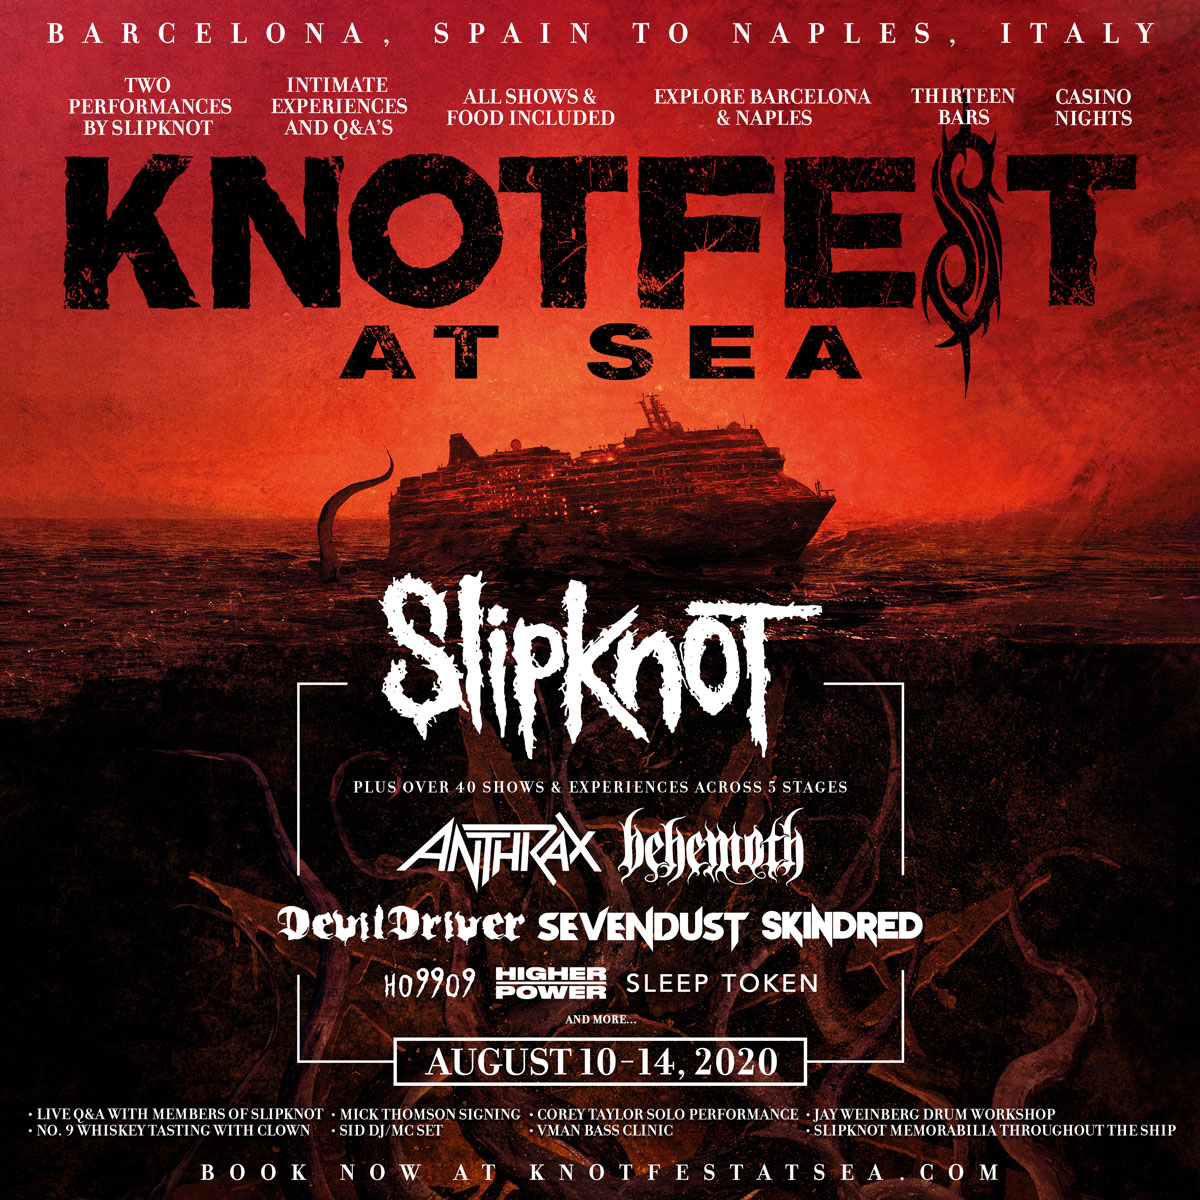 KNOTFEST AT SEA LINEUP ANNOUNCED